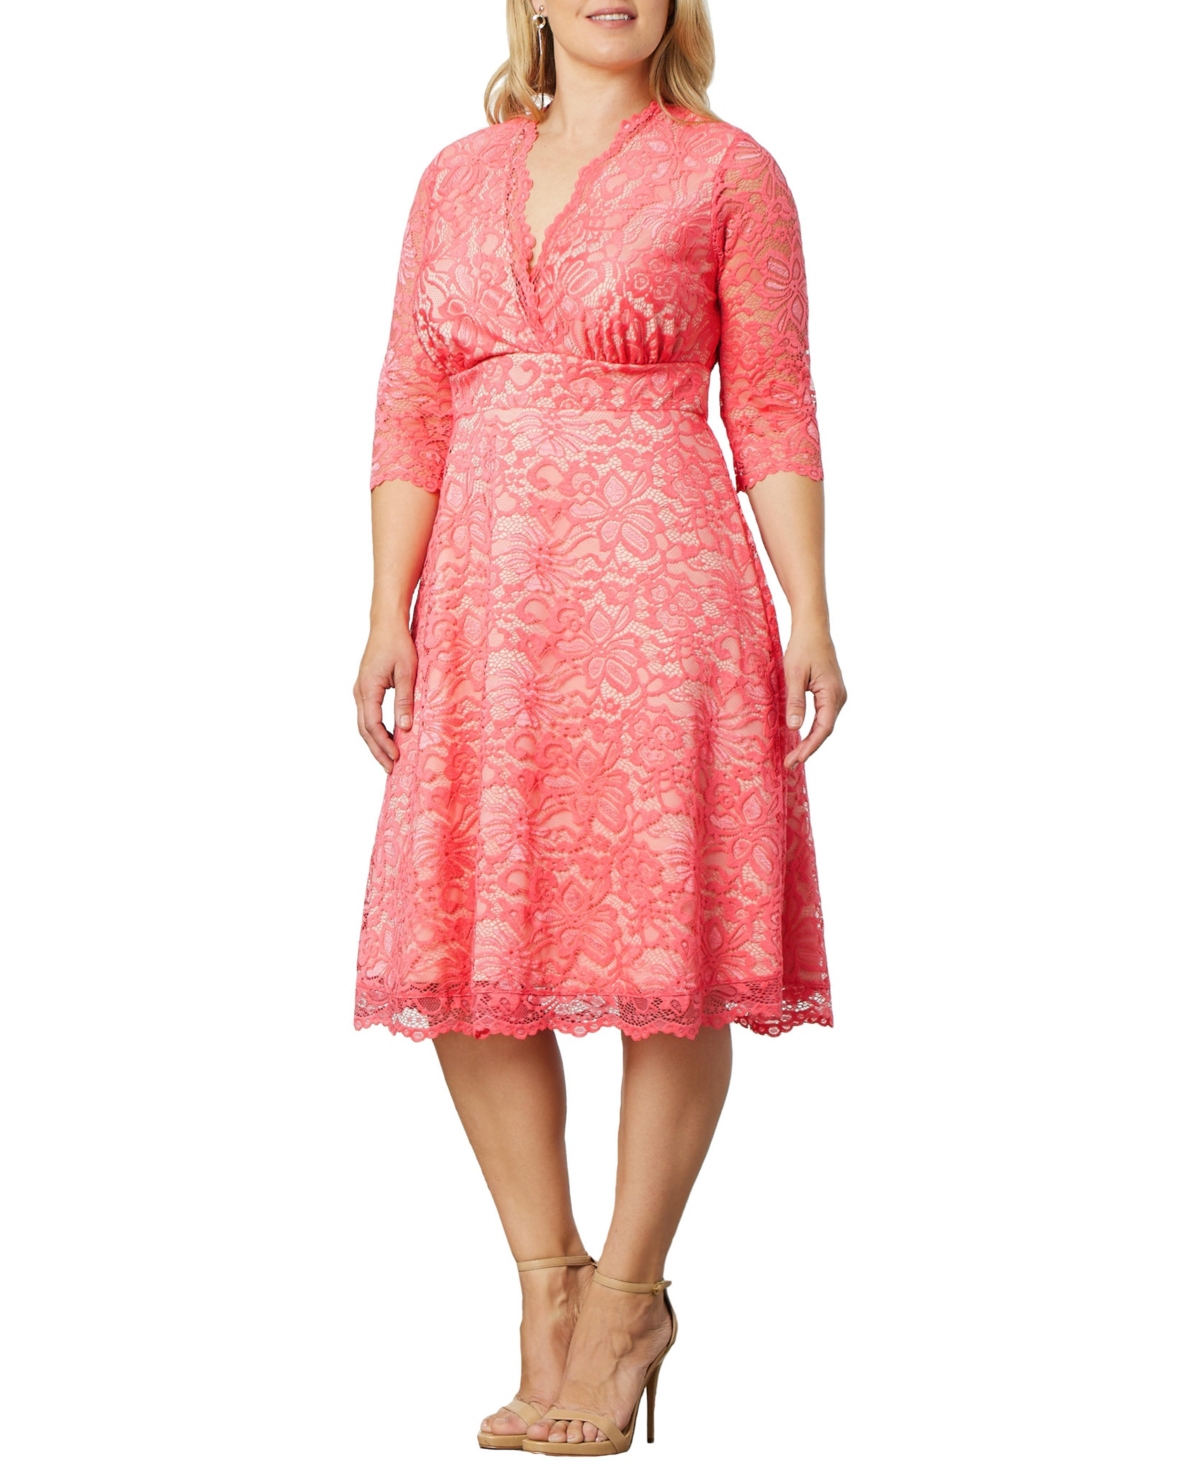 KIYONNA PLUS SIZE MADEMOISELLE LACE COCKTAIL DRESS WITH SLEEVES